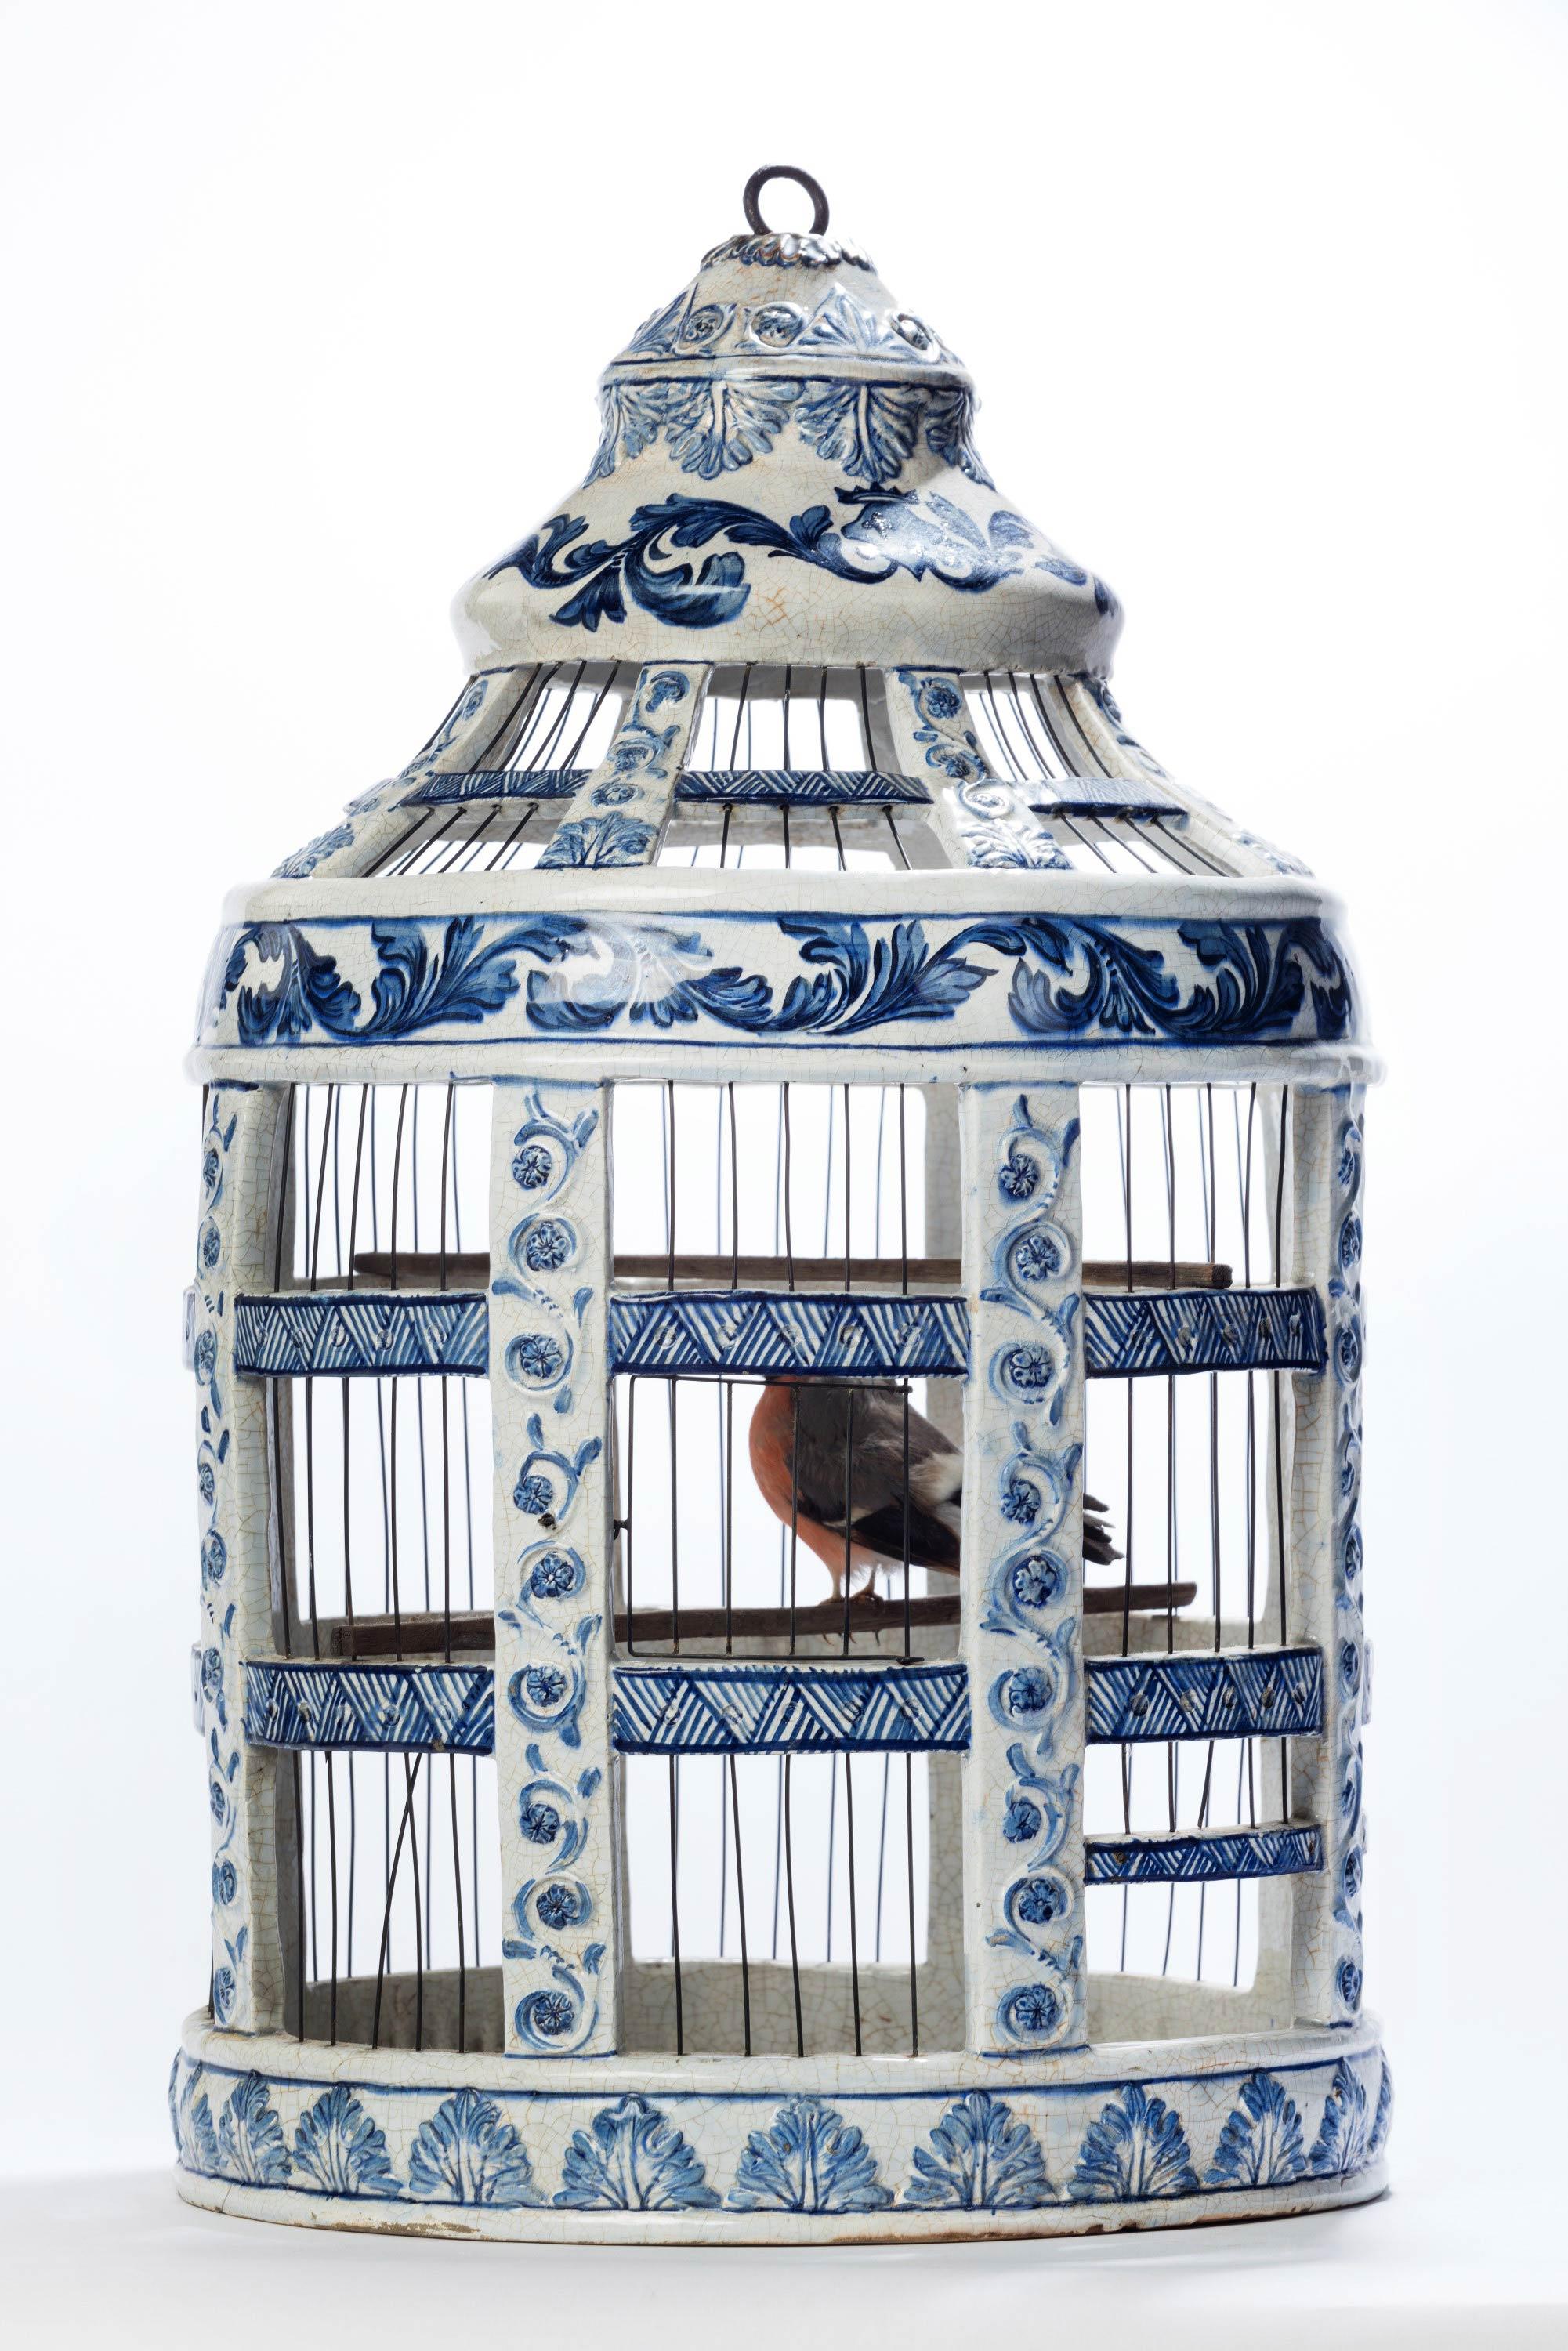 Extremely Rare 18th Century Dutch, Delft, Blue and White Birdcage 1